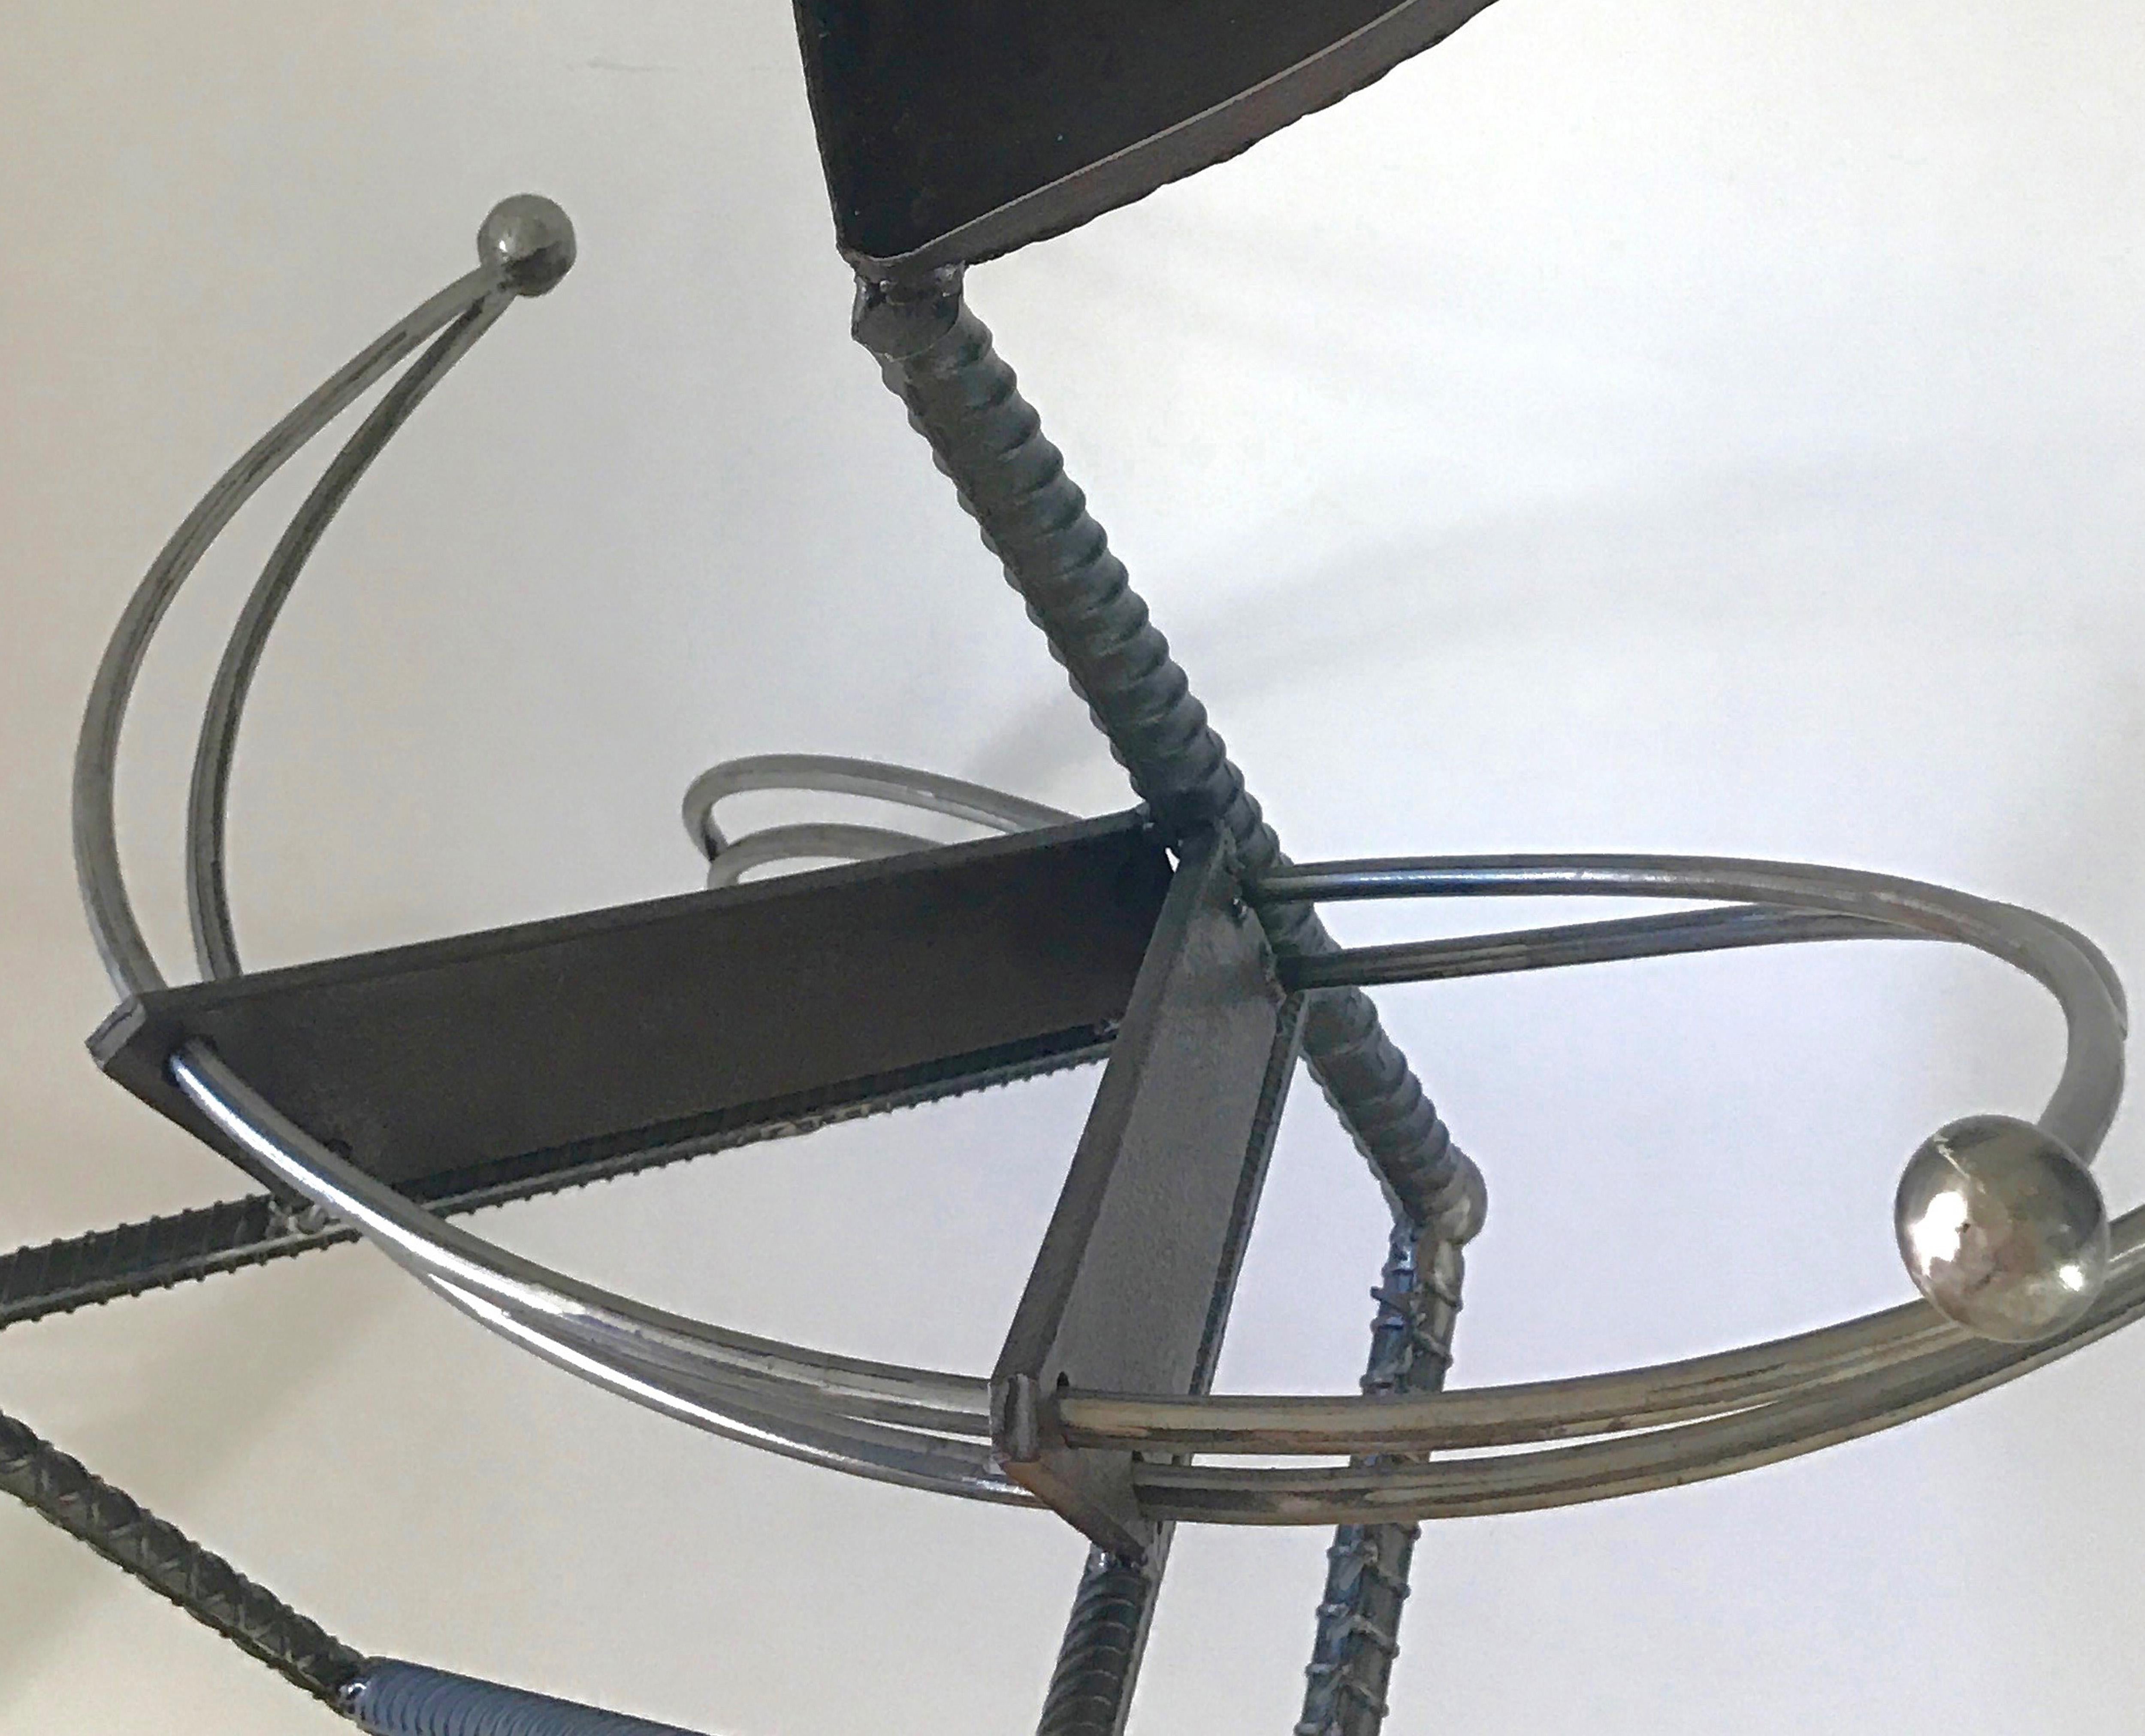 Janet Rutkowski Abstract Sculpture - "Peligroso" swooping arms spiral a welded steel spine with daring attitude